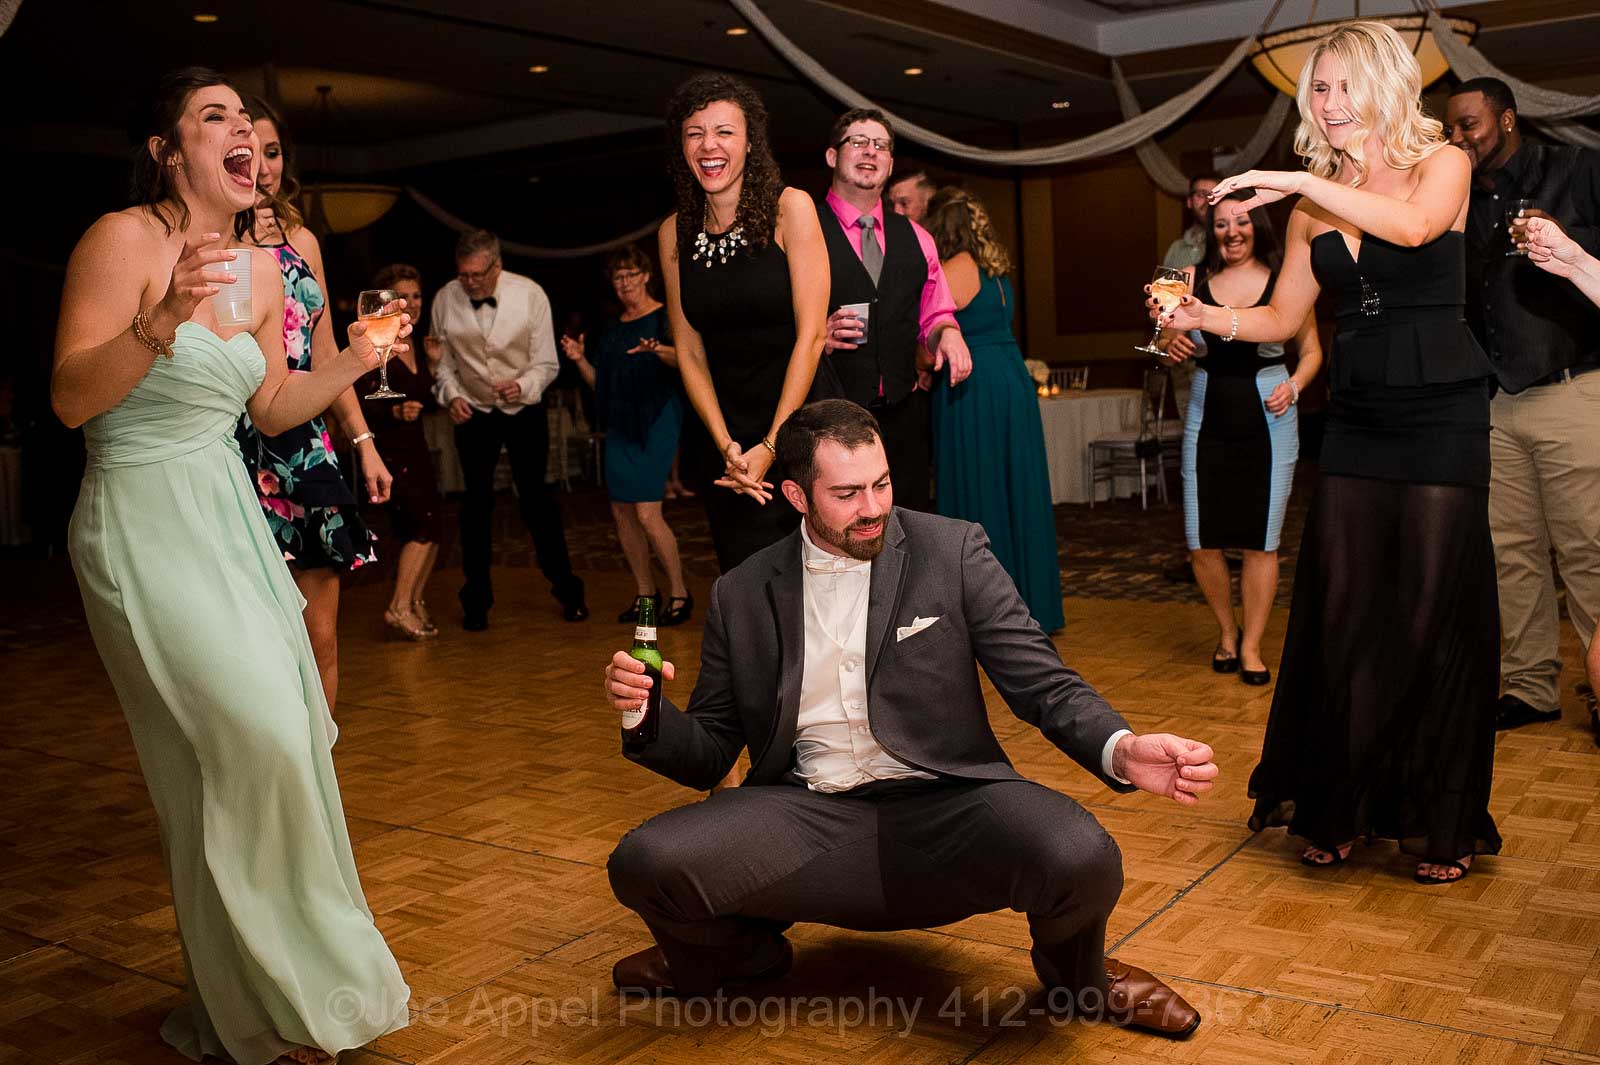 A groom holding a beer squats low and dances while guests laugh during his Embassy Suites Pittsburgh wedding.